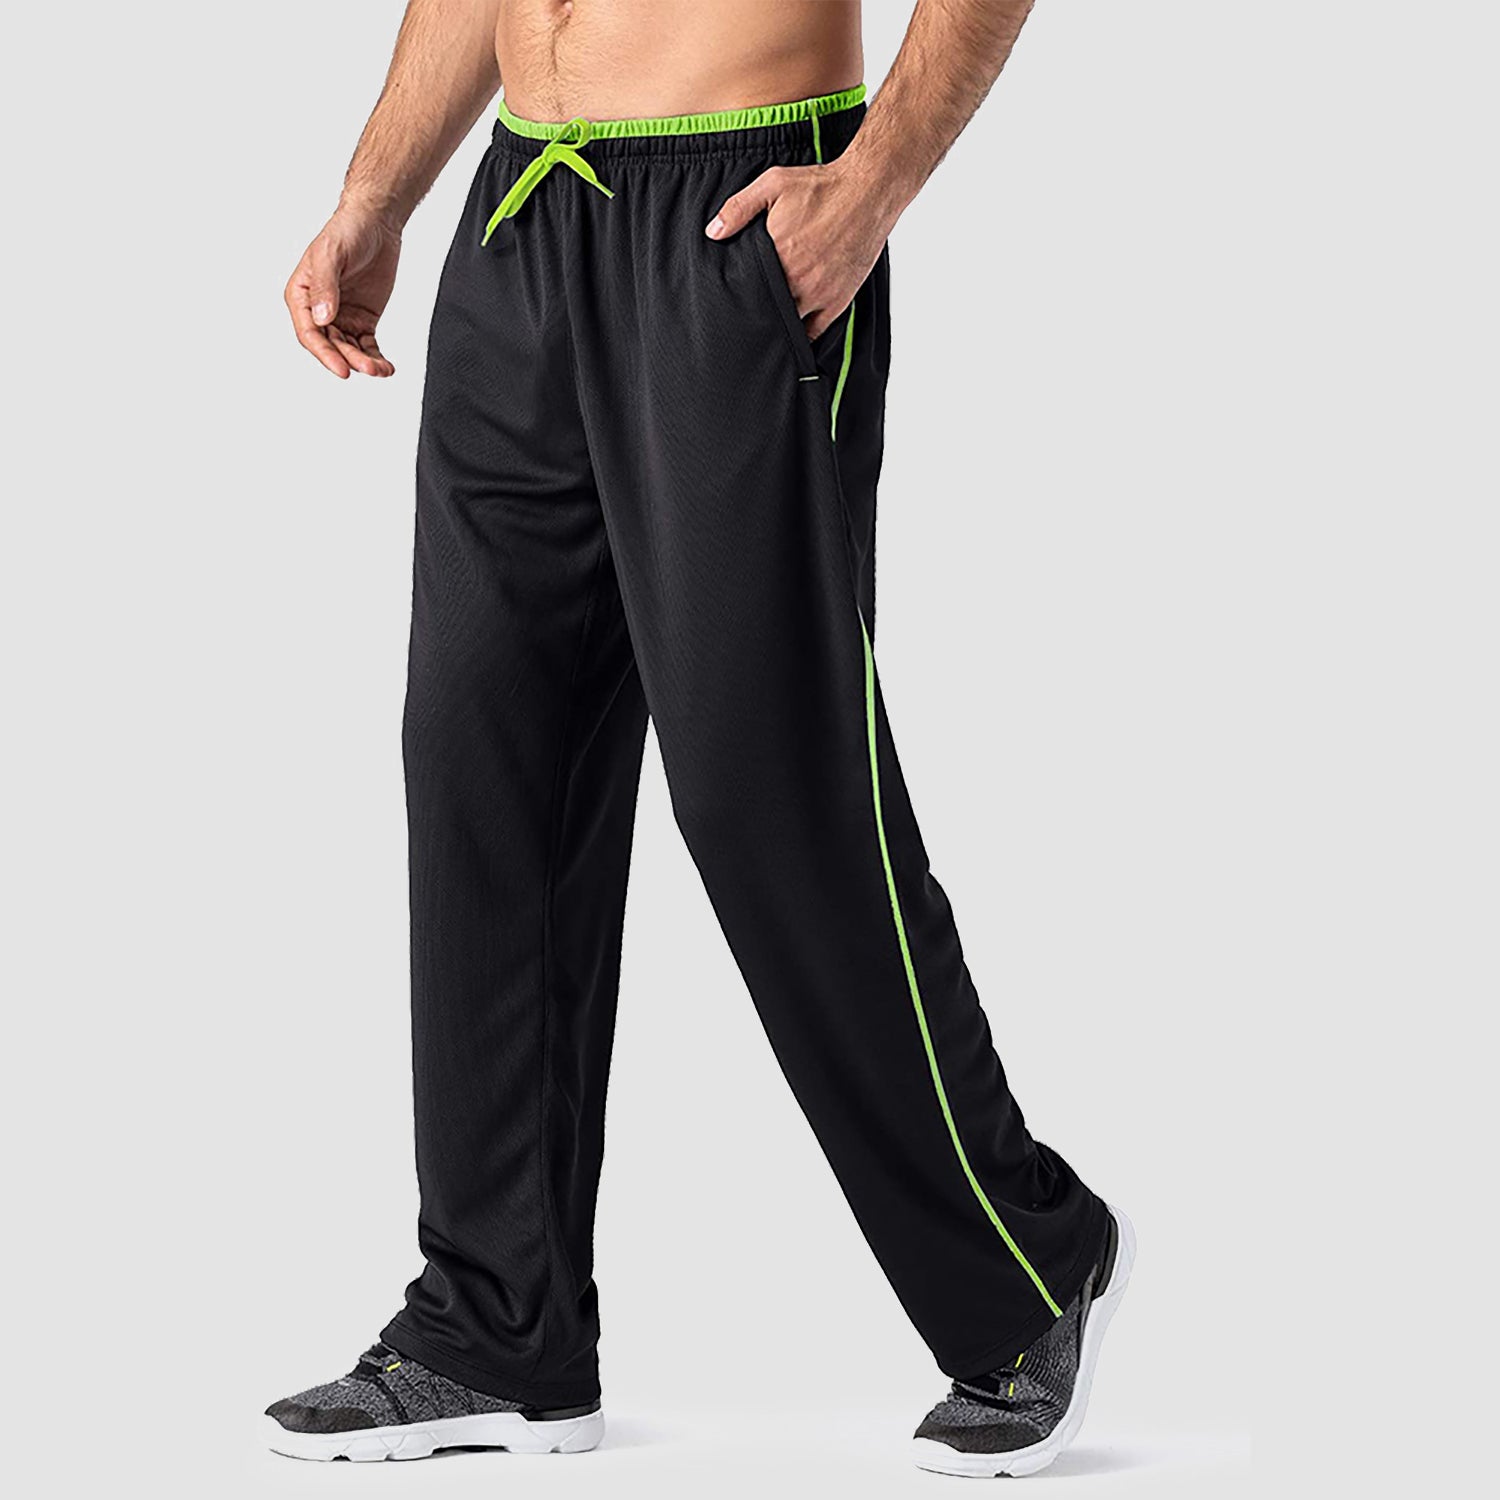 Men's Lightweight quick-drying&loose-fitting mesh sweatpants for training and fitness